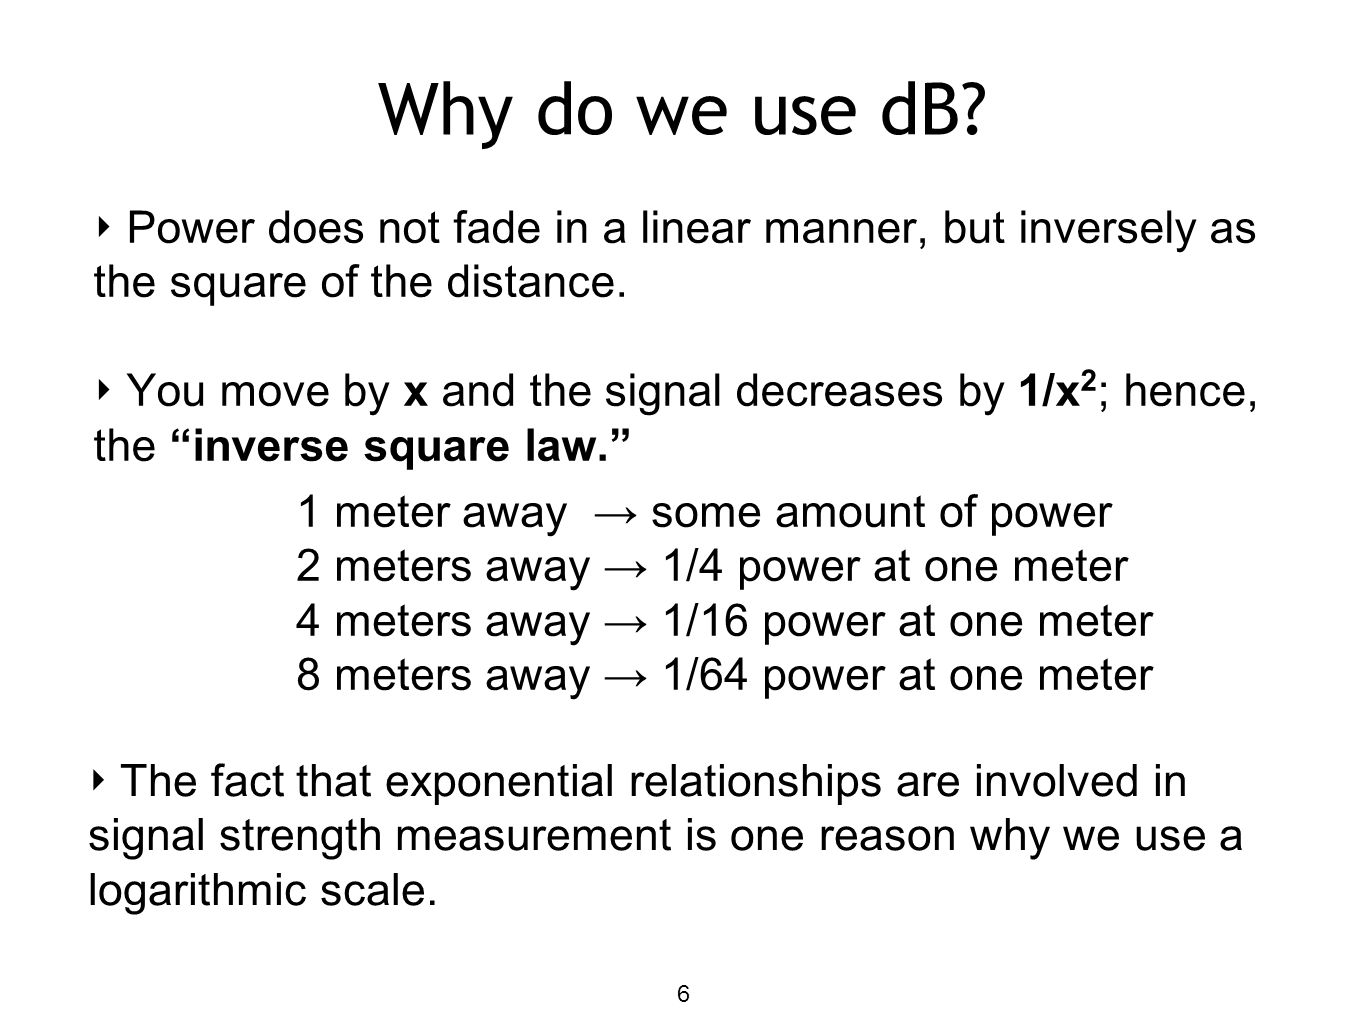 Why do we use dB Power does not fade in a linear manner, but inversely as the square of the distance.